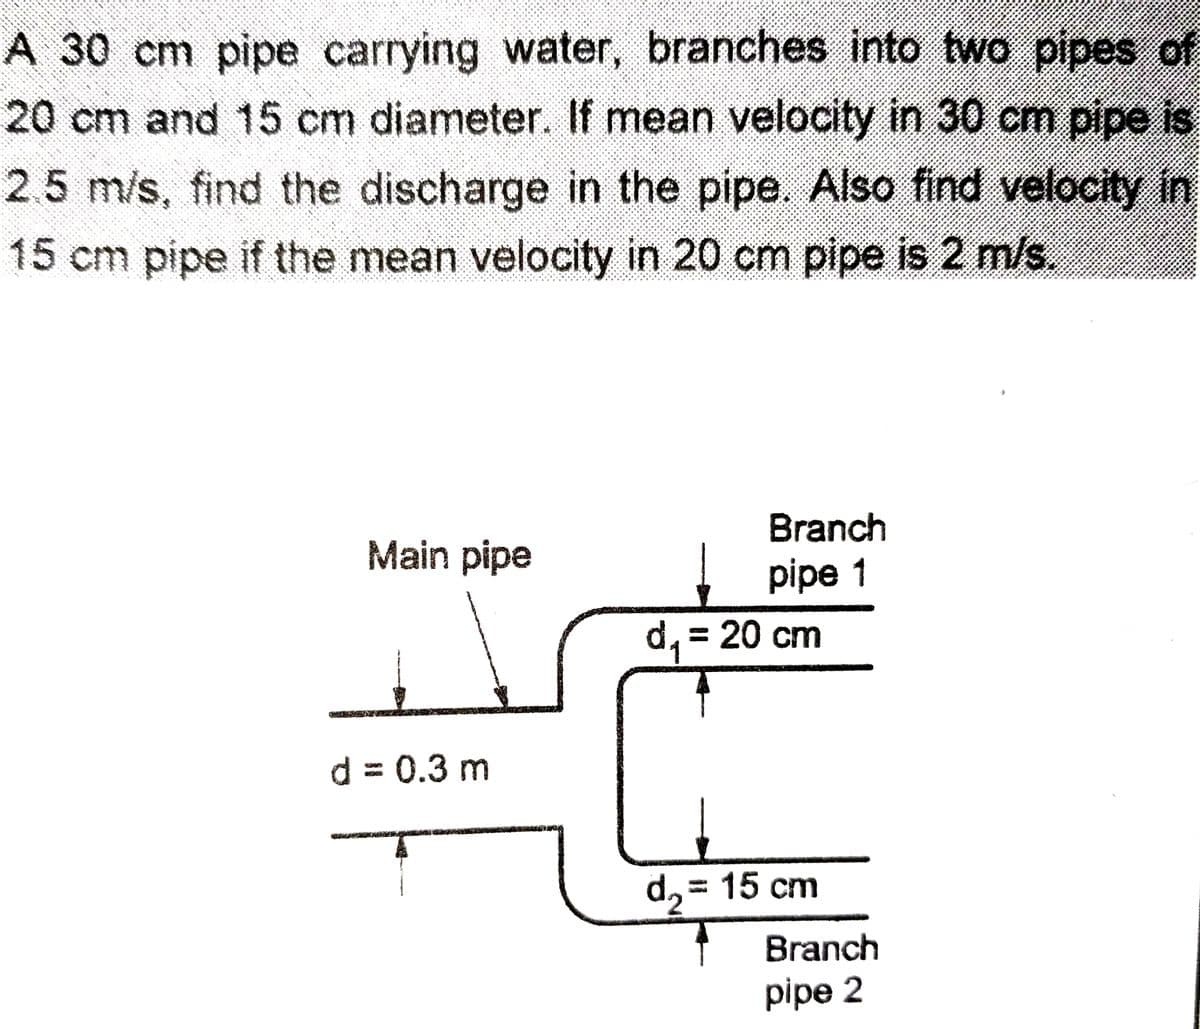 A 30 cm pipe carrying water, branches into two pipes of
20 cm and 15 cm diameter. If mean velocity in 30 cm pipe is
2.5 m/s, find the discharge in the pipe. Also find velocity in
15 cm pipe if the mean velocity in 20 cm pipe is 2 m/s.
Main pipe
Branch
pipe 1
d = 0.3 m
d₁ = 20 cm
d₂ = 15 cm
Branch
pipe 2